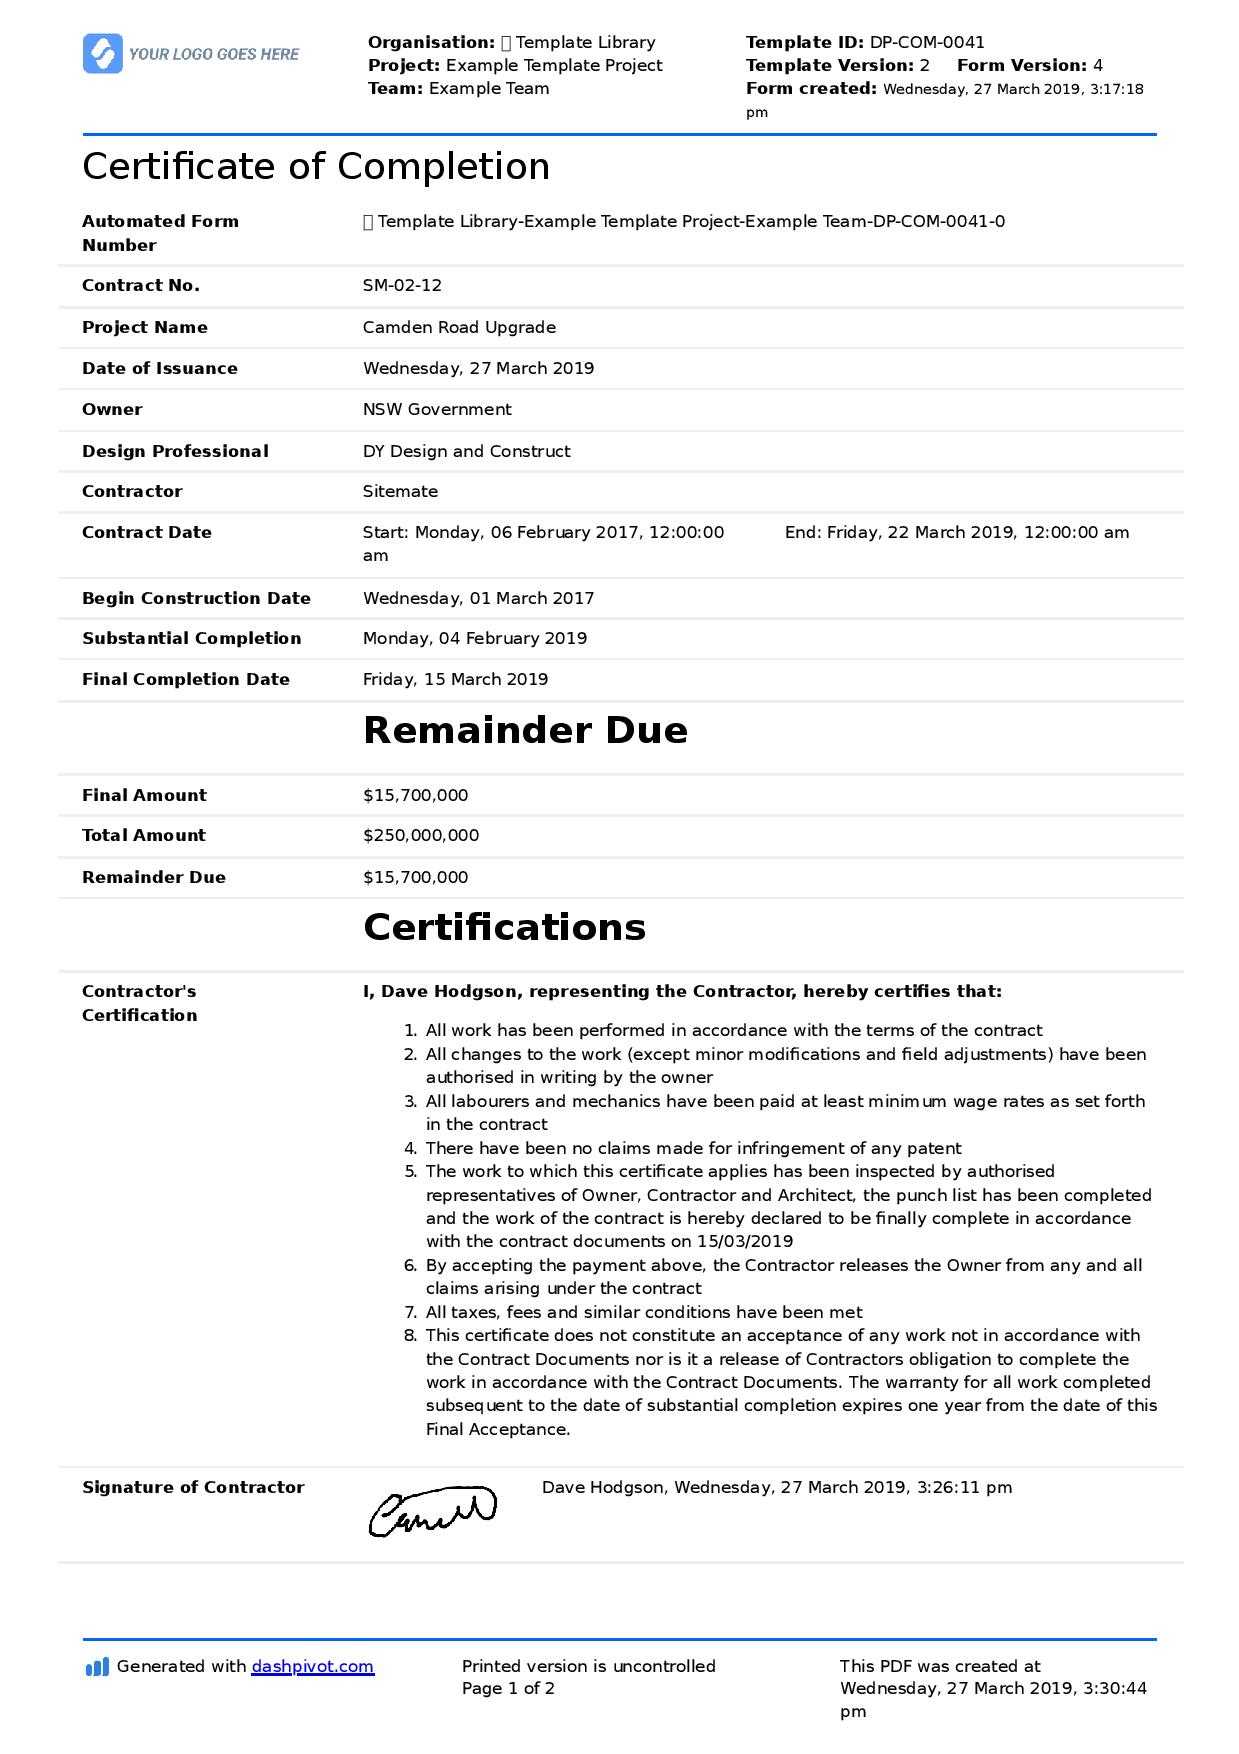 Certificate Of Completion For Construction (Free Template + For Construction Certificate Of Completion Template